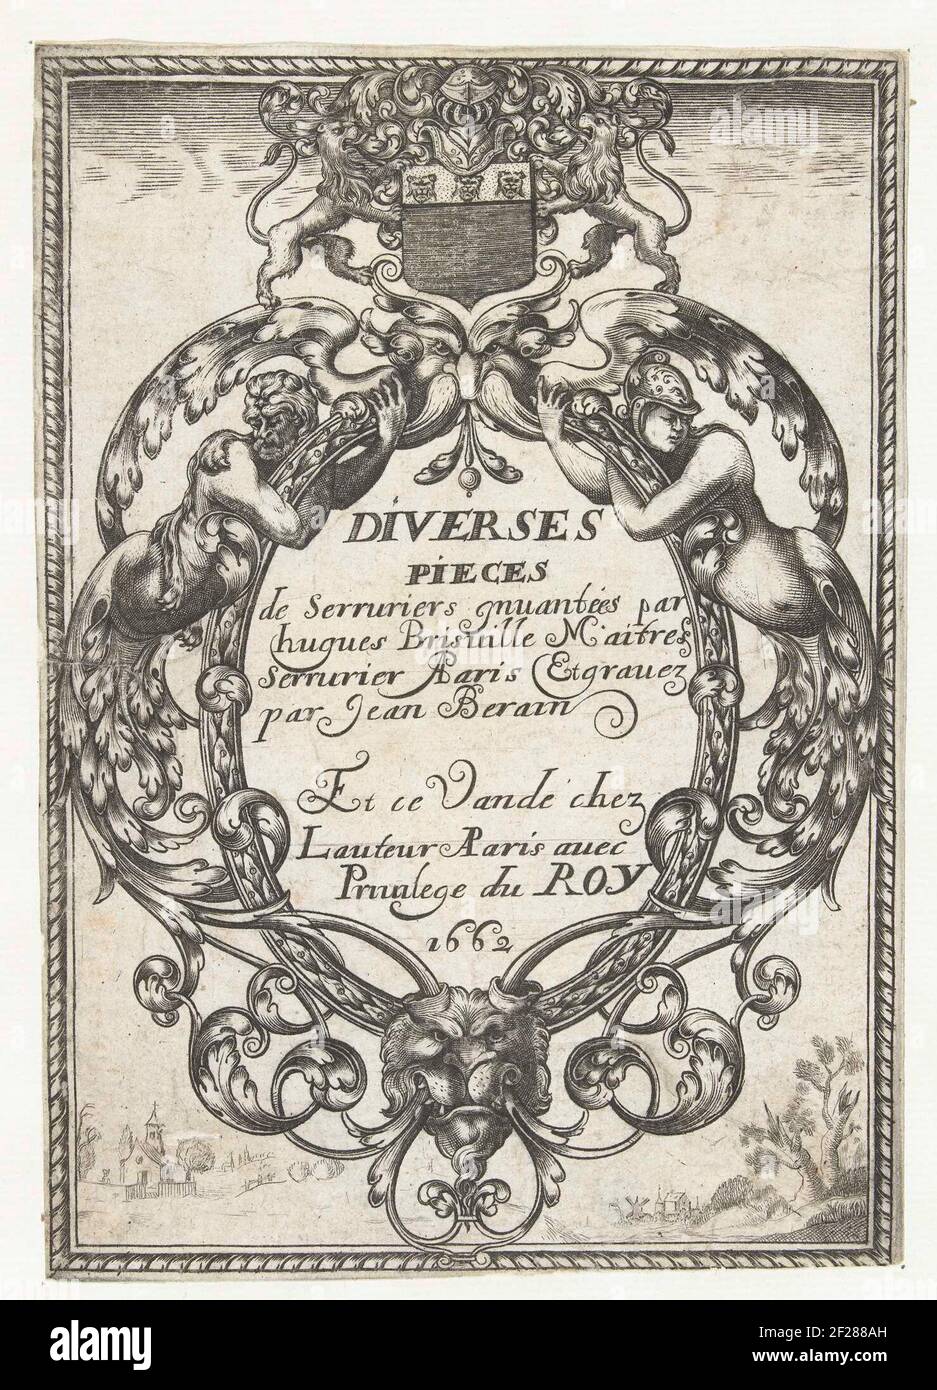 Titelblad: Diverses Pièces de Serruriers; Diverses Pièces de Serruriers.The text is in a round cartouche with a mask at the top and at the bottom of a lion's head. Title page from series of 14 sheets with batter, keys, door knockers and buttons. Stock Photo